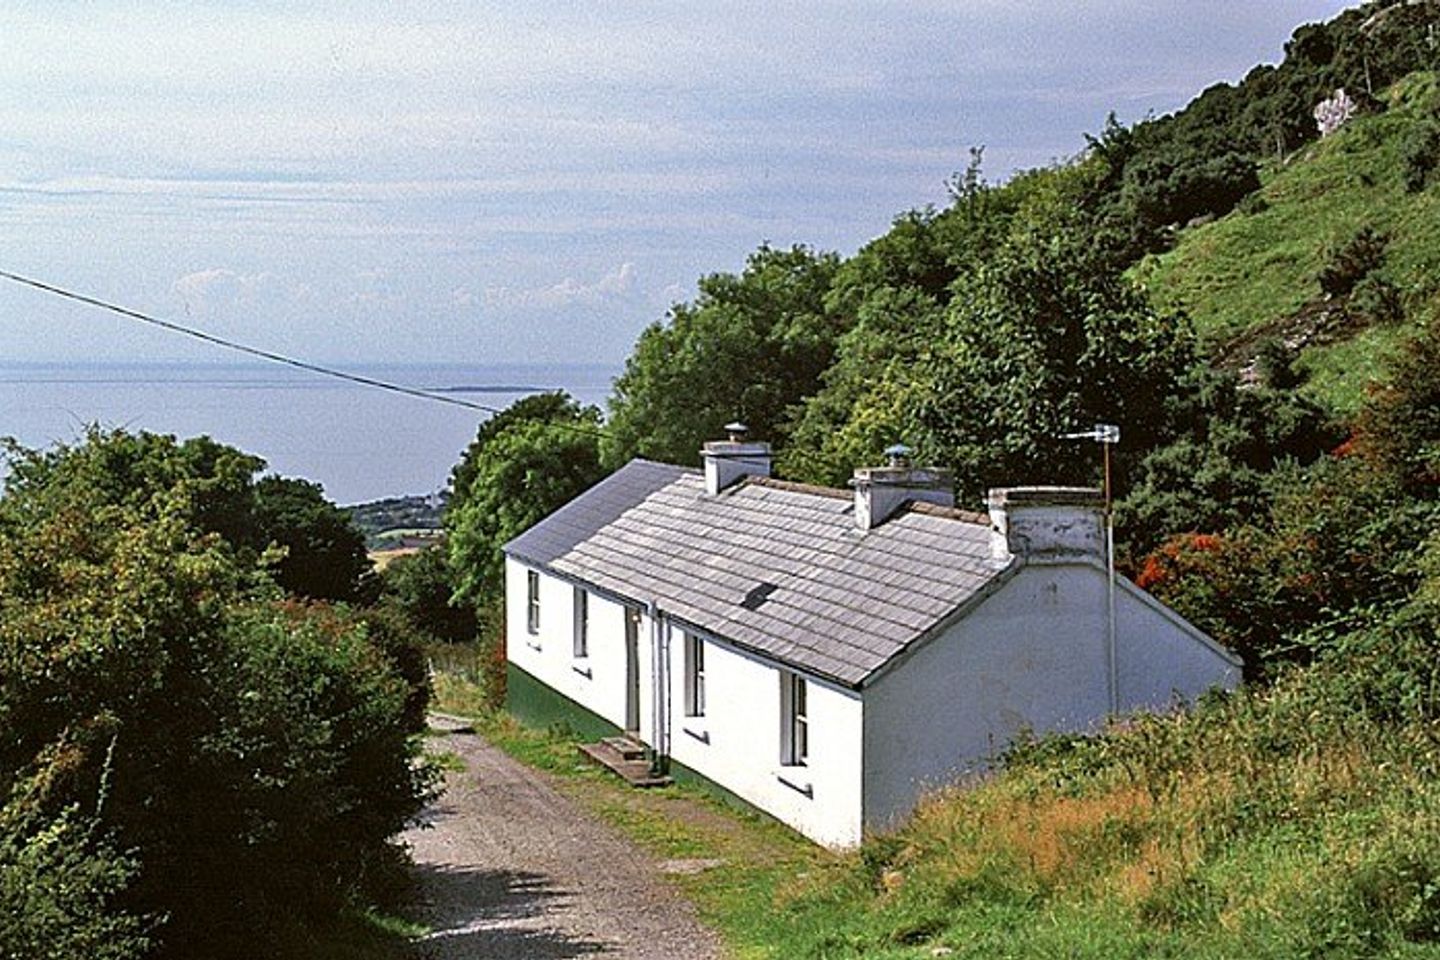 Fintragh (I288), Killybegs, Co. Donegal